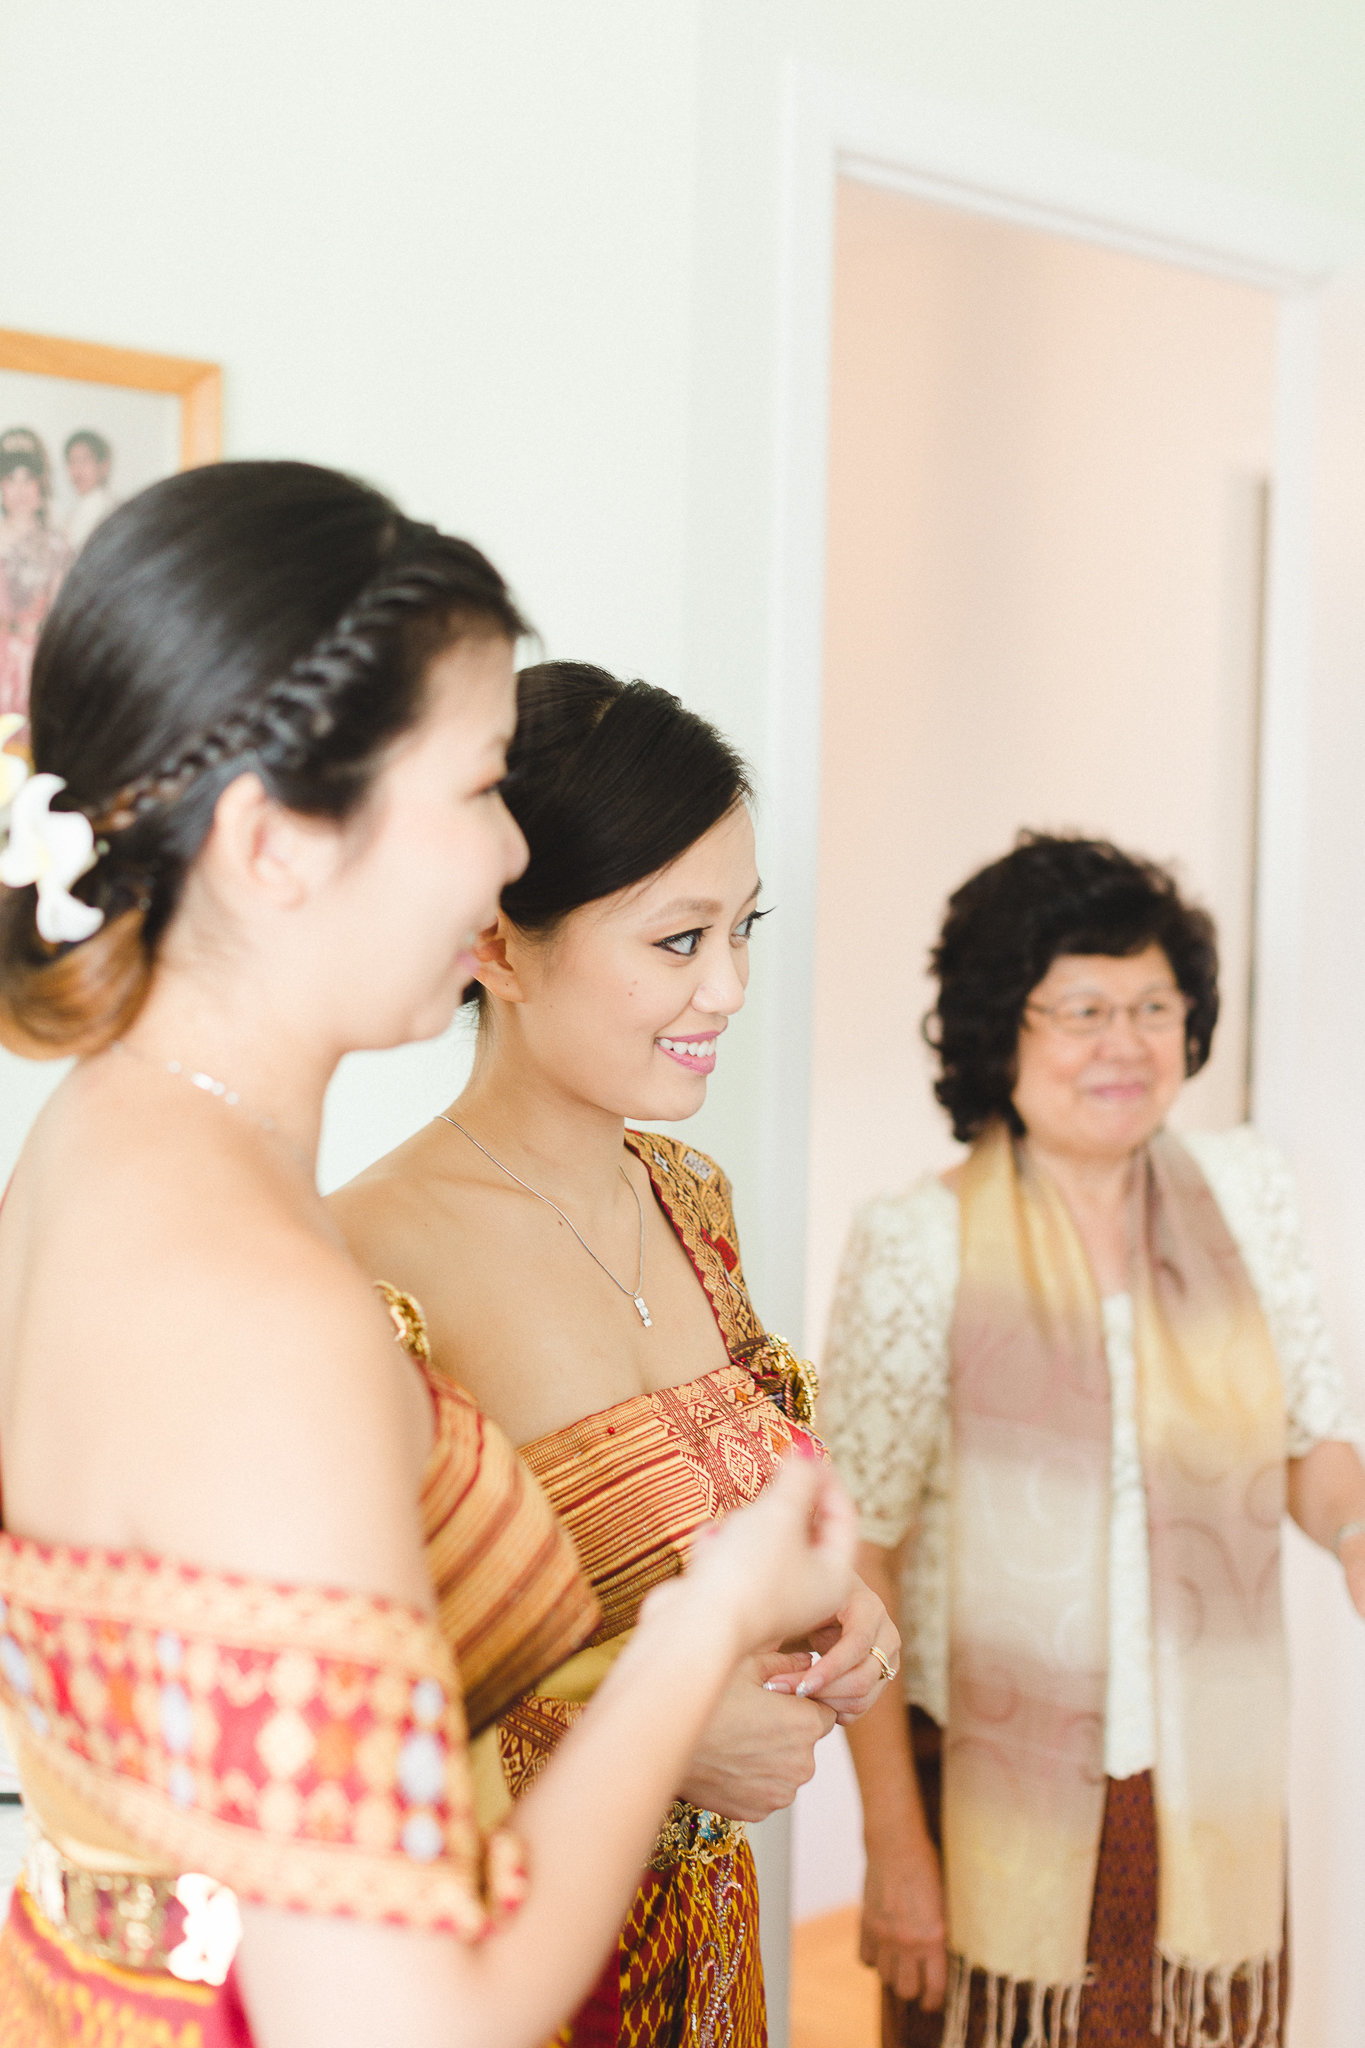 photographe-montreal-mariage-culturel-traditionnel-cambodgien-lisa-renault-photographie-traditional-cultural-cambodian-wedding-3